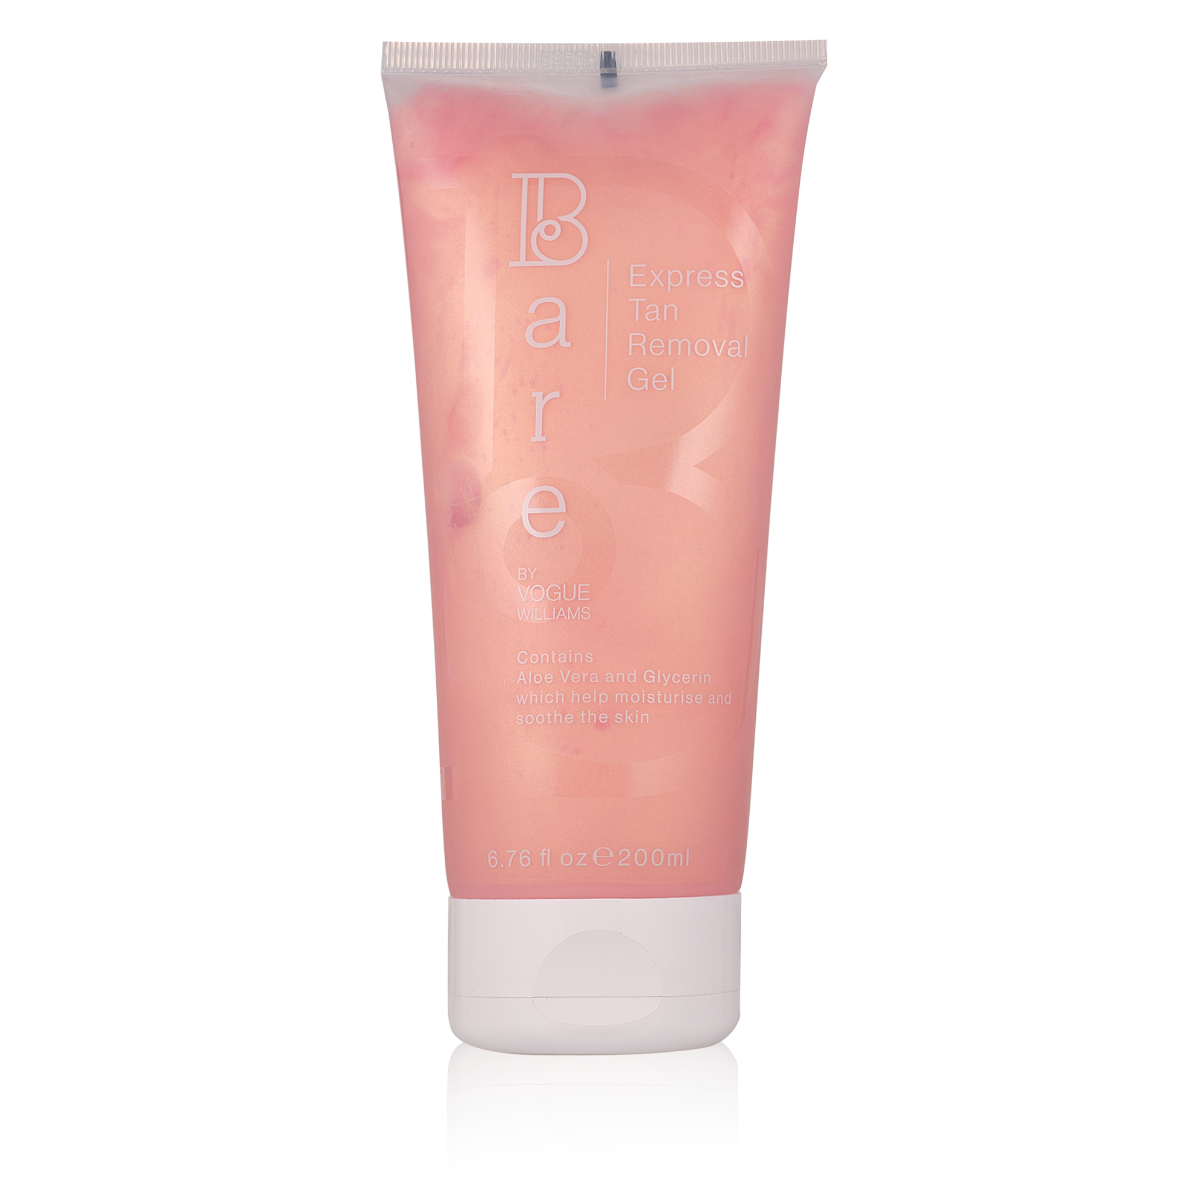 Bare by Vogue Express Tan Removal Ge